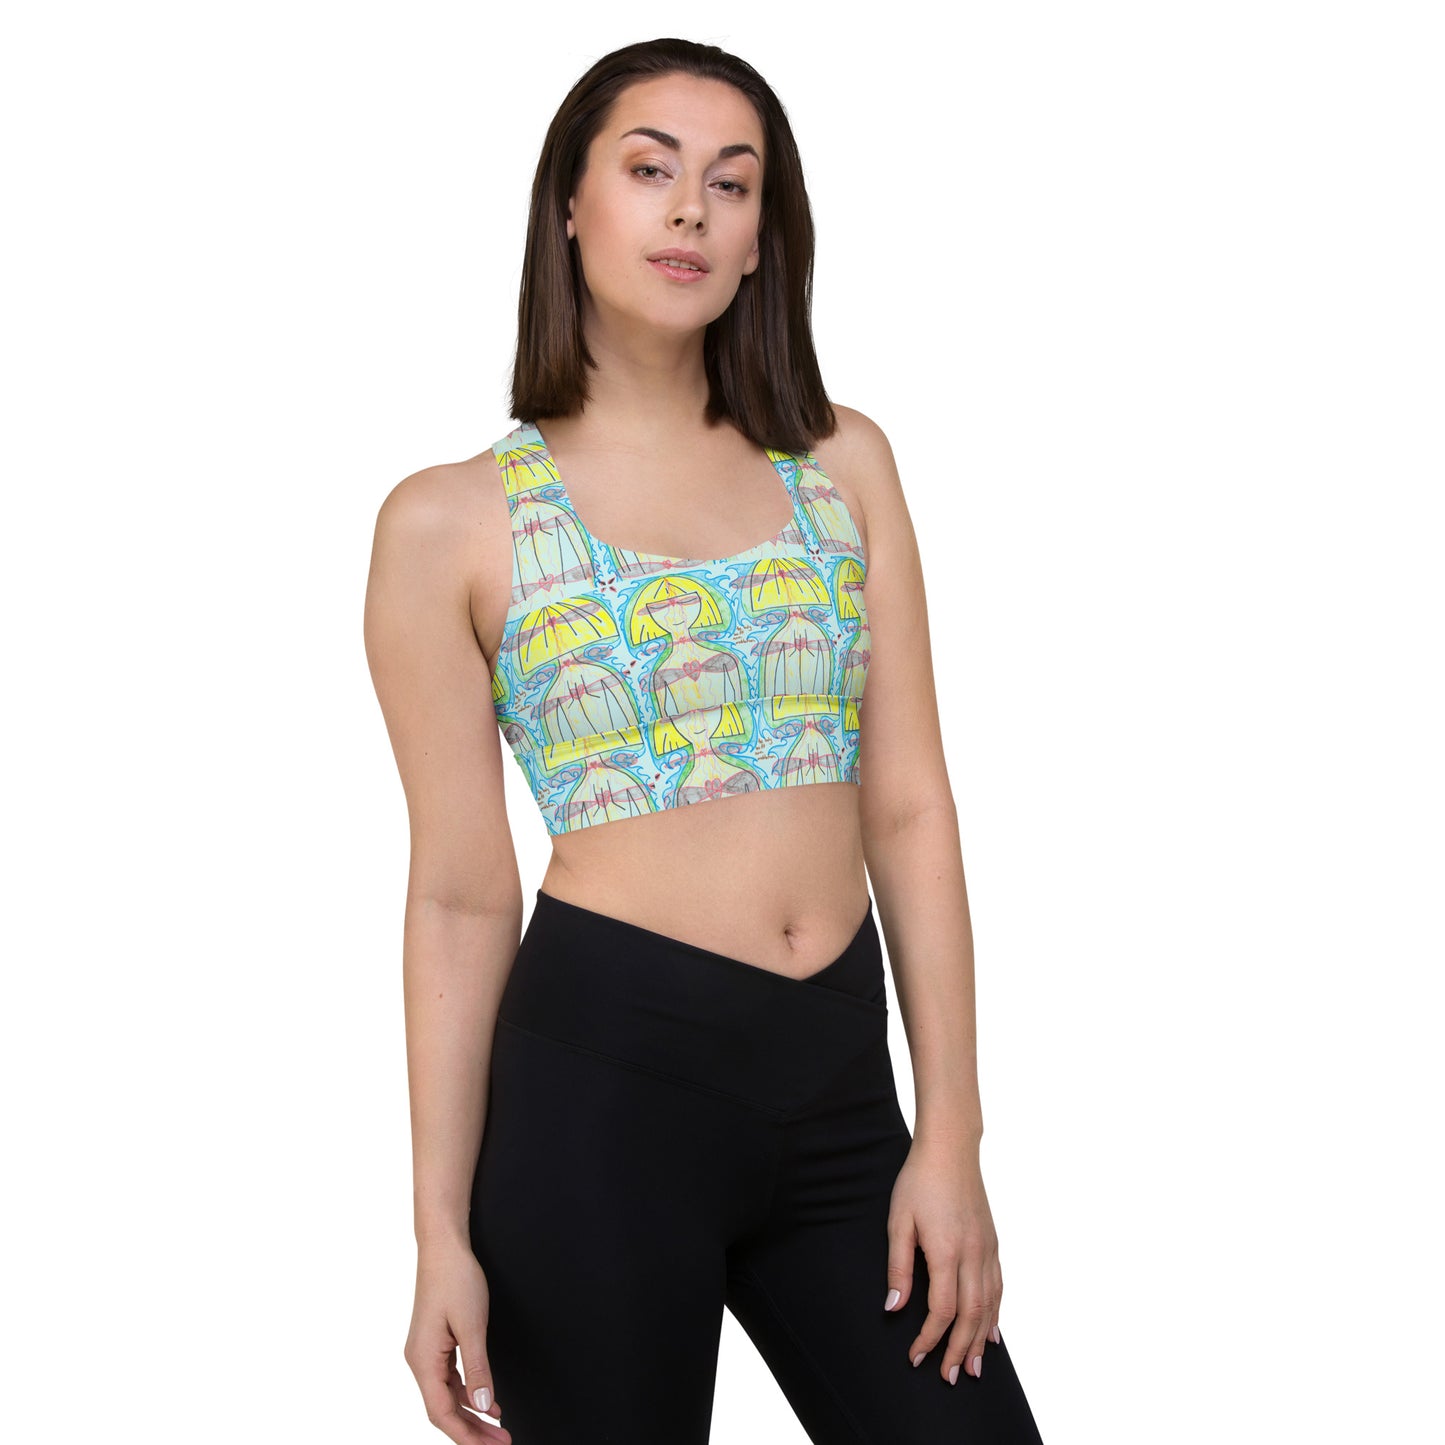 the body has its own meditation, super crop top/sports bra